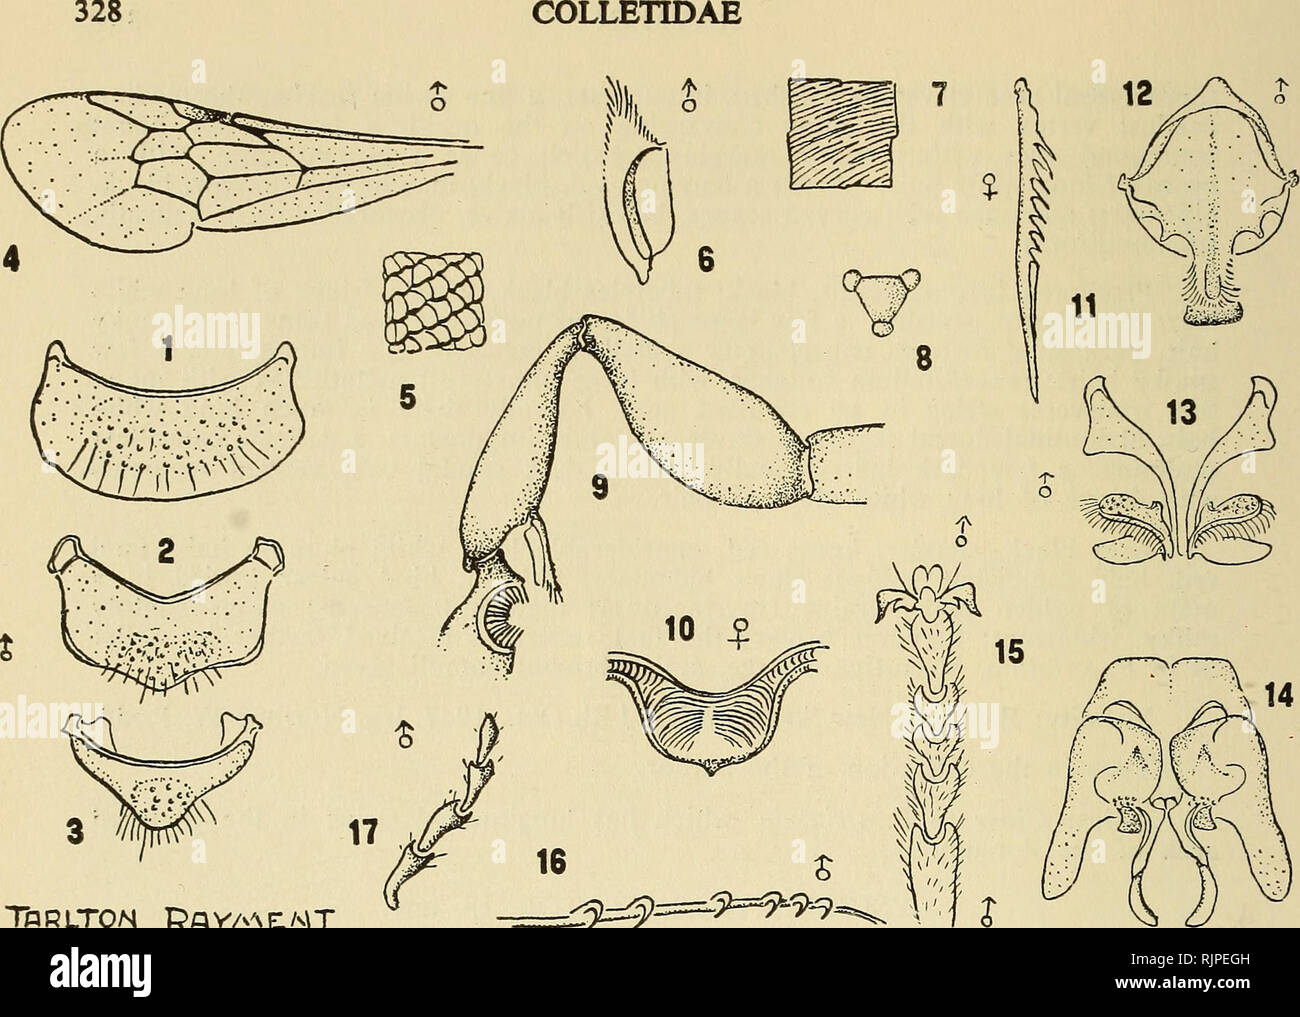 . The Australian zoologist. Zoology; Zoology; Zoology. Tfc R LTON Pq v/^^ E. MT ;^^^=^^==^-9i9=^ &quot;.f J EXPLANATION OF TEXT-FIGURE. 1, 2, 3. Apical plates of the male abdomen, Lysicolletes imitator, sp. nov. 4. Anterior wing; note the two cubital cells and large pterostigma. 5. Scale-like sculpture of the metathorax. 6. Strigilis of the anterior leg. 7. Lineate sculpture of the abdomen. 8. The female of Filiglossa proximo, sp. nov., carried large loads of pollen, probably from Leptospermum sp. 9. Portion of front leg of Lysicolletes imitator. 10. Lineate sculpture of metathorax of female  Stock Photo